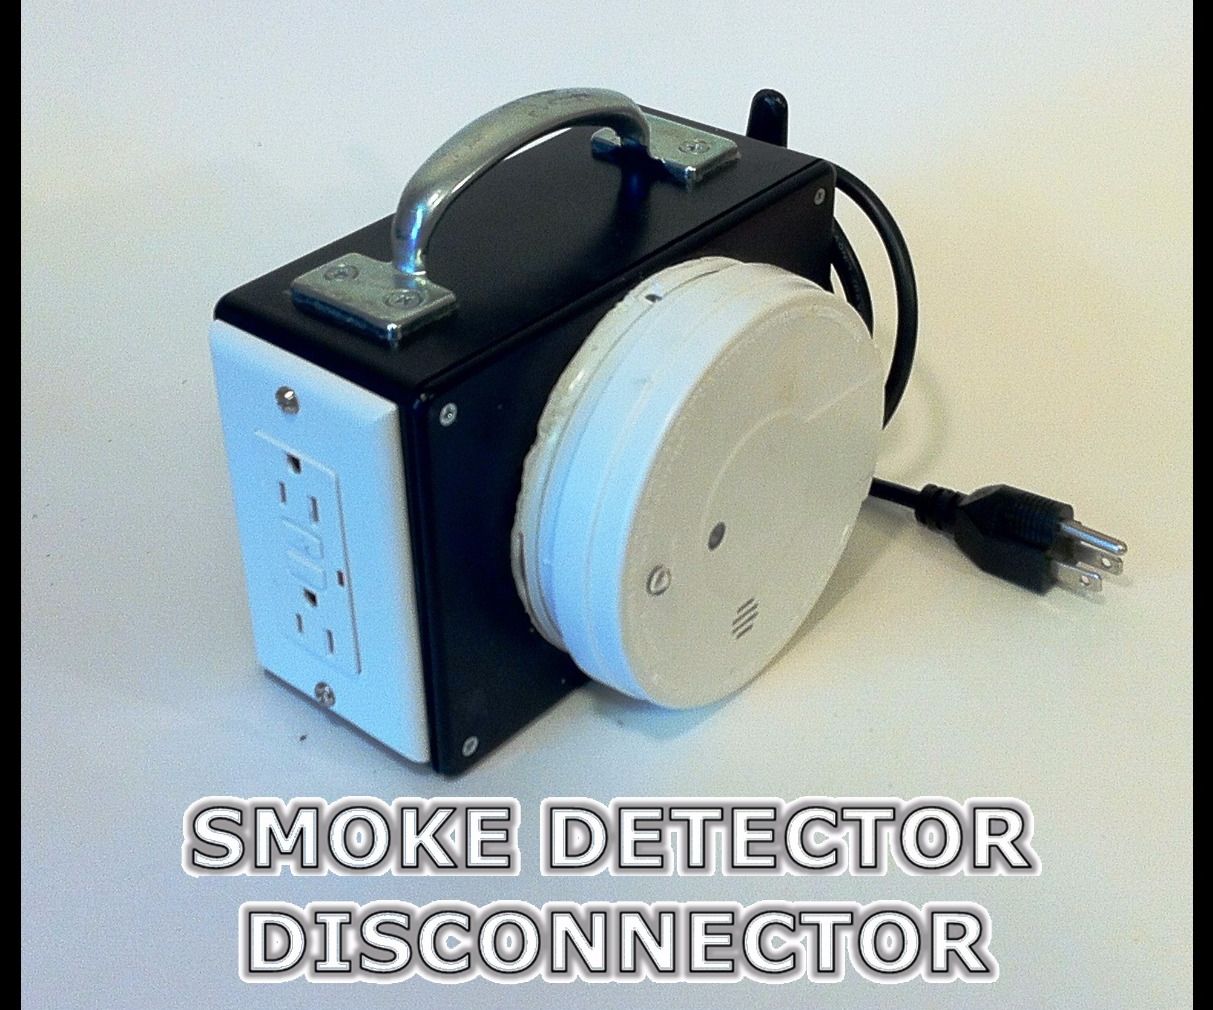 Prevent House Fires With the Smoke Detector Disconnector